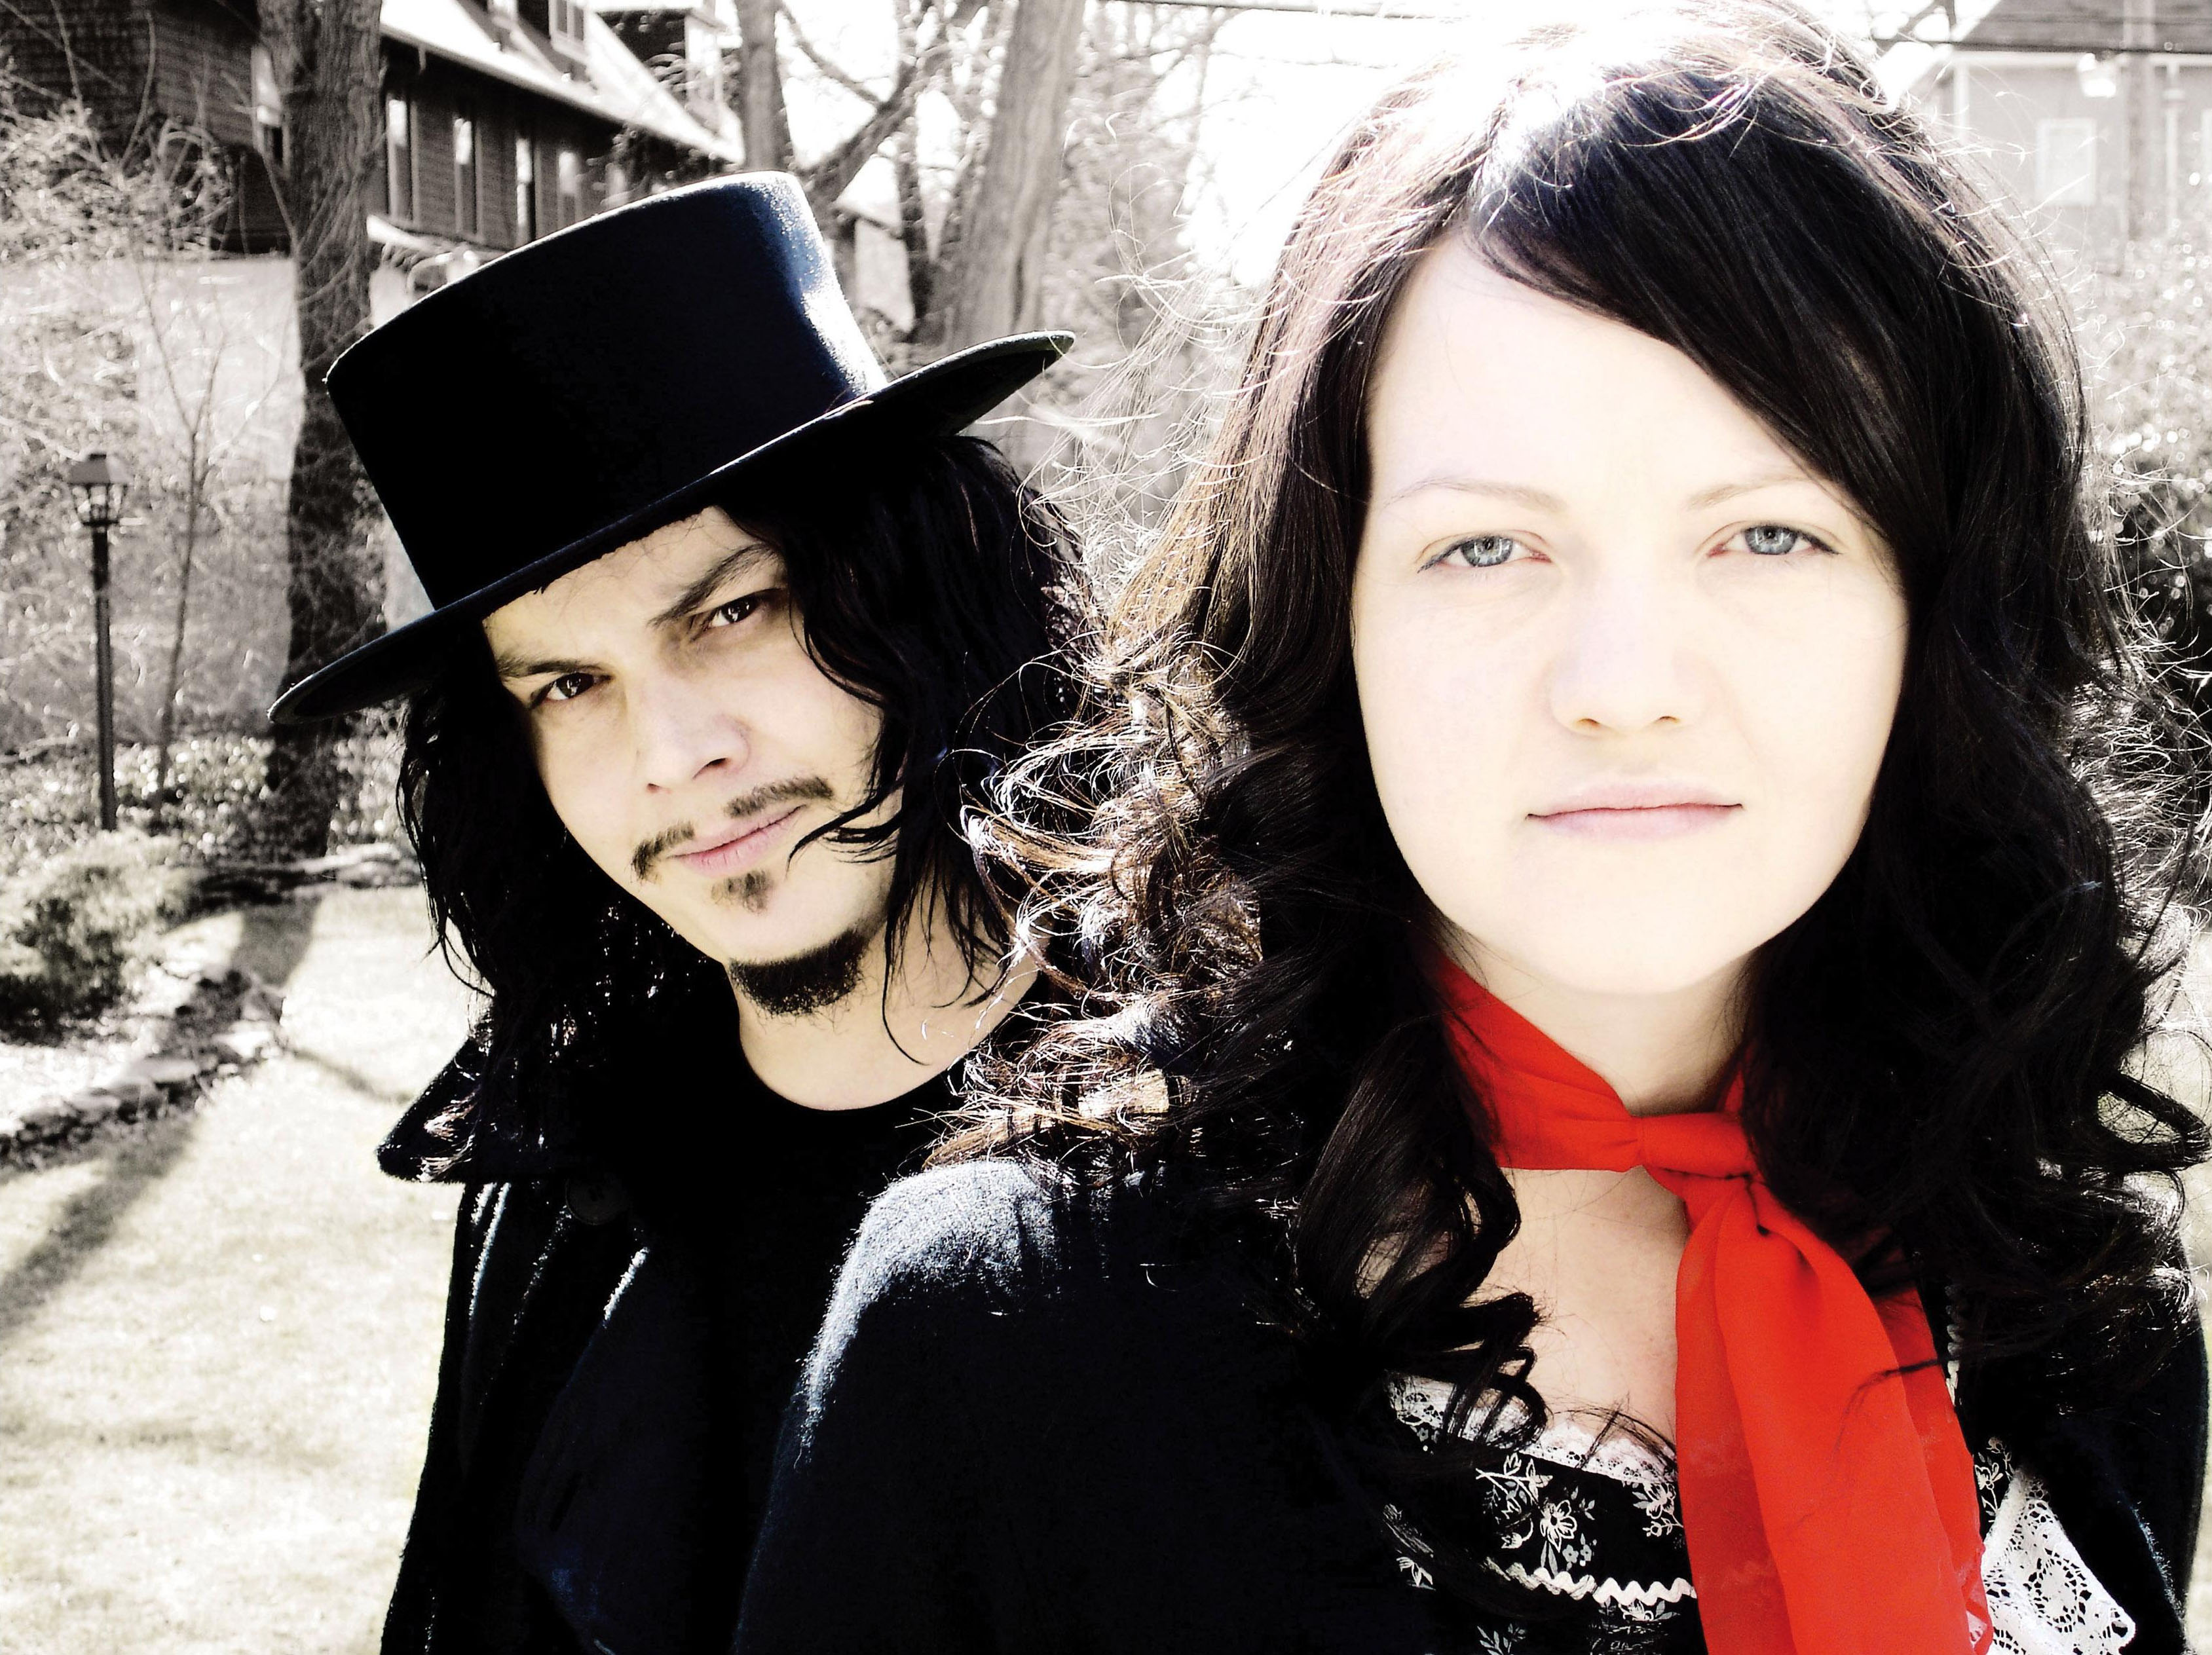 The White Stripes Wallpapers